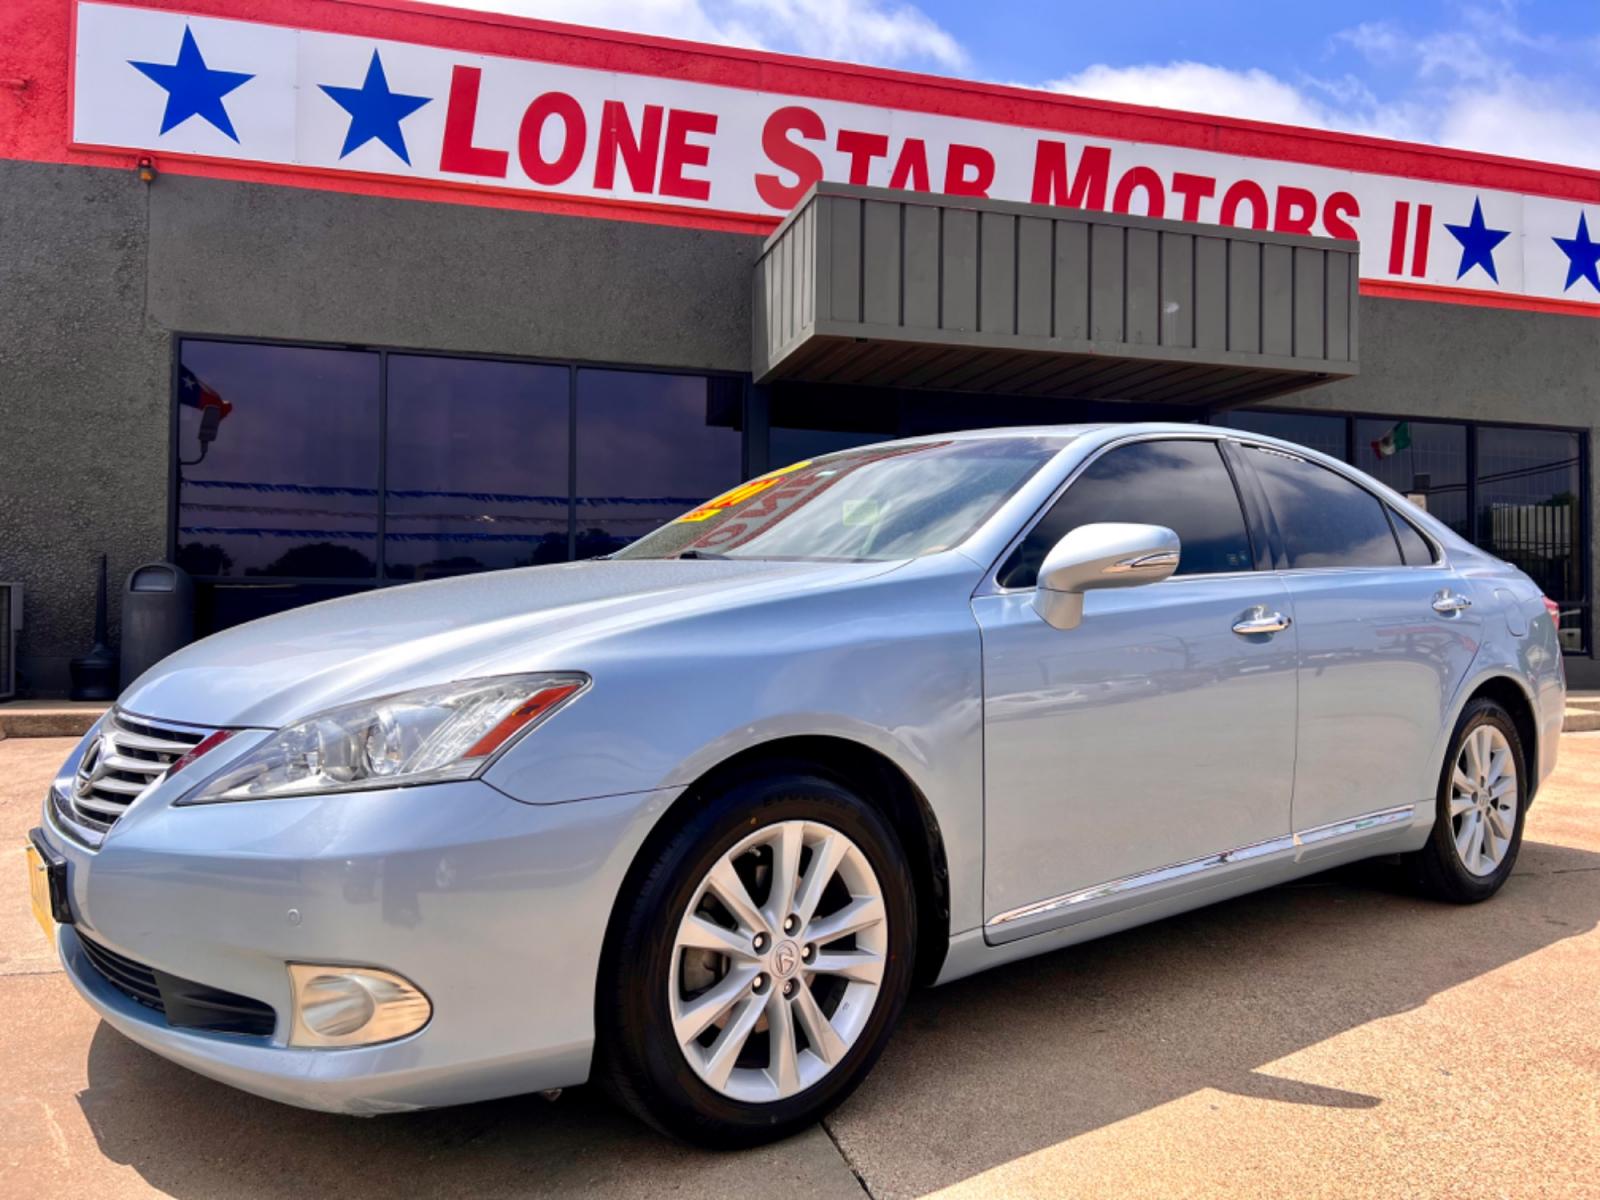 2010 BLUE /Tan LEXUS ES 350 BASE Base 4dr Sedan (JTHBK1EG3A2) with an 3.5L V6 engine, Automatic 6-Speed transmission, located at 5900 E. Lancaster Ave., Fort Worth, TX, 76112, (817) 457-5456, 0.000000, 0.000000 - Cash CASH CAR ONLY, NO FINANCING AVAILABLE. THIS 2010 LEXUS ES 350 BASE 4 DOOR SEDAN RUNS AND DRIVES GREAT. IT IS EQUIPPED WITH A CD PLAYER, AM/FM RADIO AND AN AUX PORT. THE TIRES ARE IN GOOD CONDITION AND STILL HAVE TREAD LEFT ON THEM. THIS CAR WILL NOT LAST SO ACT FAST! Call or text Fran - Photo #1